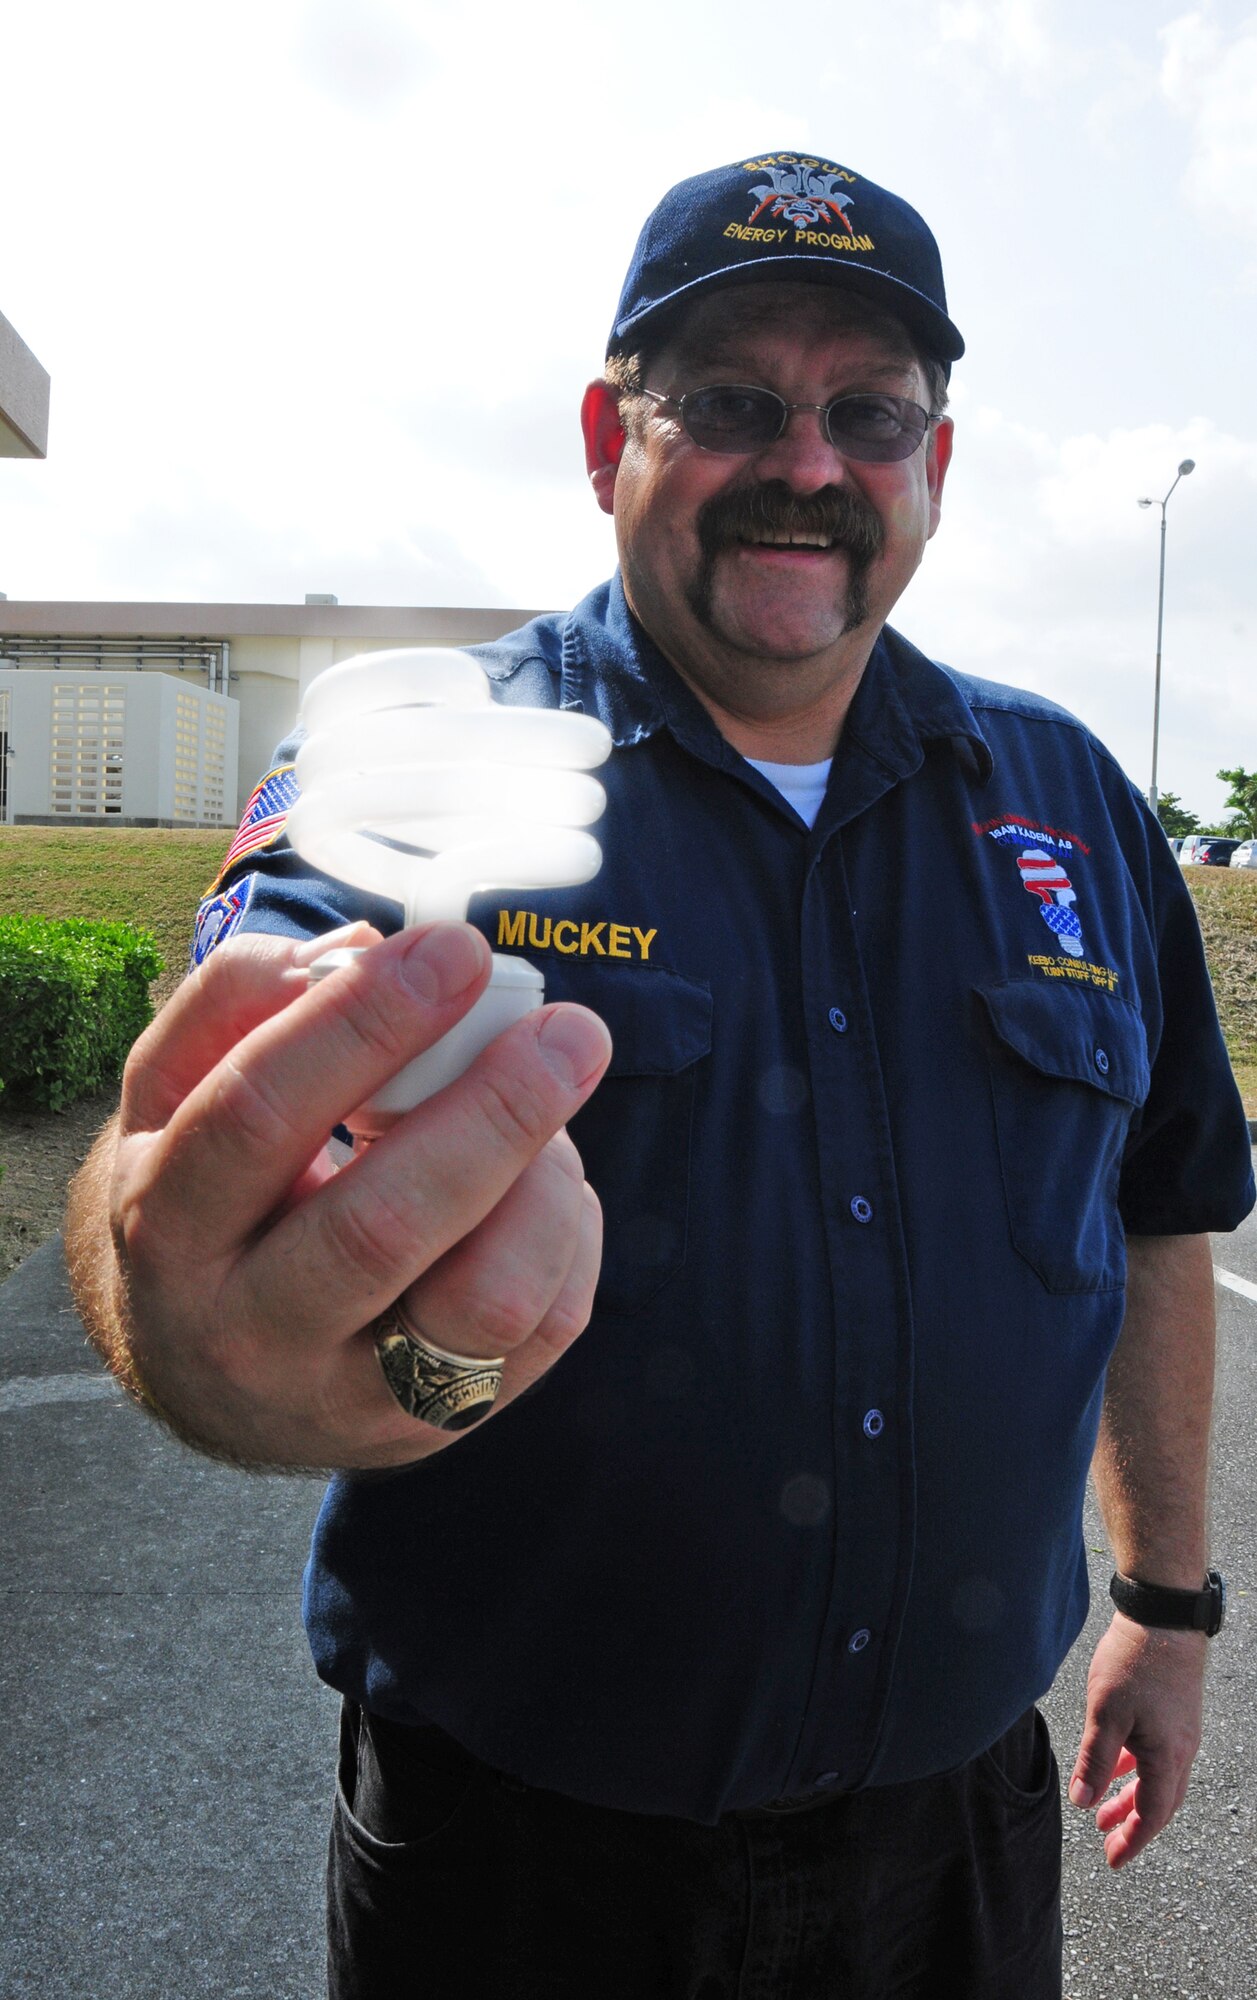 John Muckey, a resource efficiency manager for the 718th Civil Engineer Squadron at Kadena Air Base, Japan, reveals one of the resources, an energy-saving light bulb, that helped the base earn the 2009 Federal Energy and Water Management Award. Mr. Muckey is known around the base as "Energy Guy."  (U.S. Air Force photo/Staff Sgt. Lakisha A. Croley)